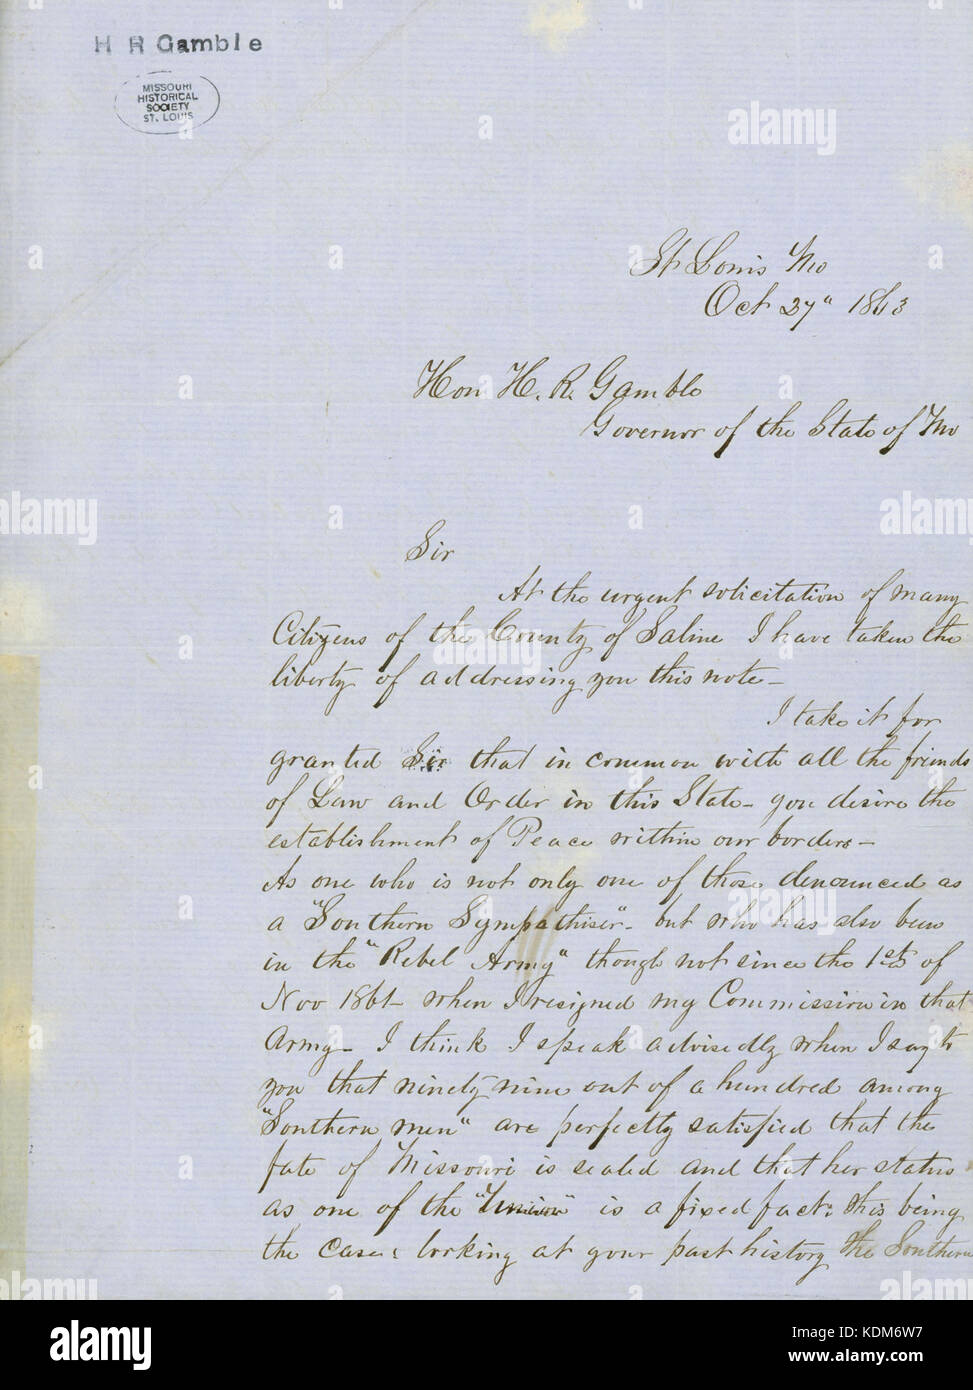 Letter signed John Sheridan, St. Louis, Mo., to Hon. H.R. Gamble, Governor of the State of Mo., October 27, 1863 Stock Photo